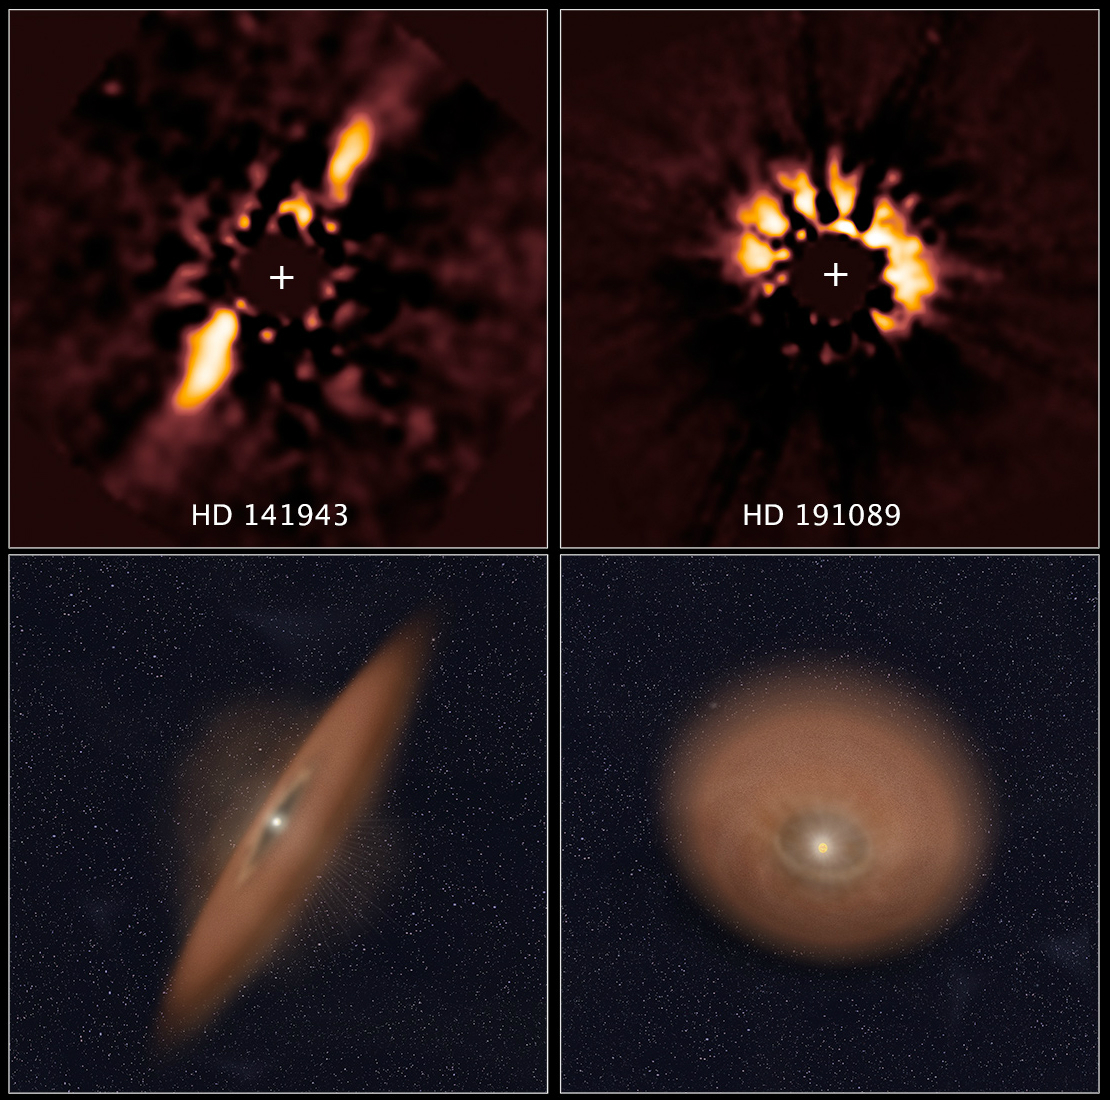 Images of planetary disks from Hubble